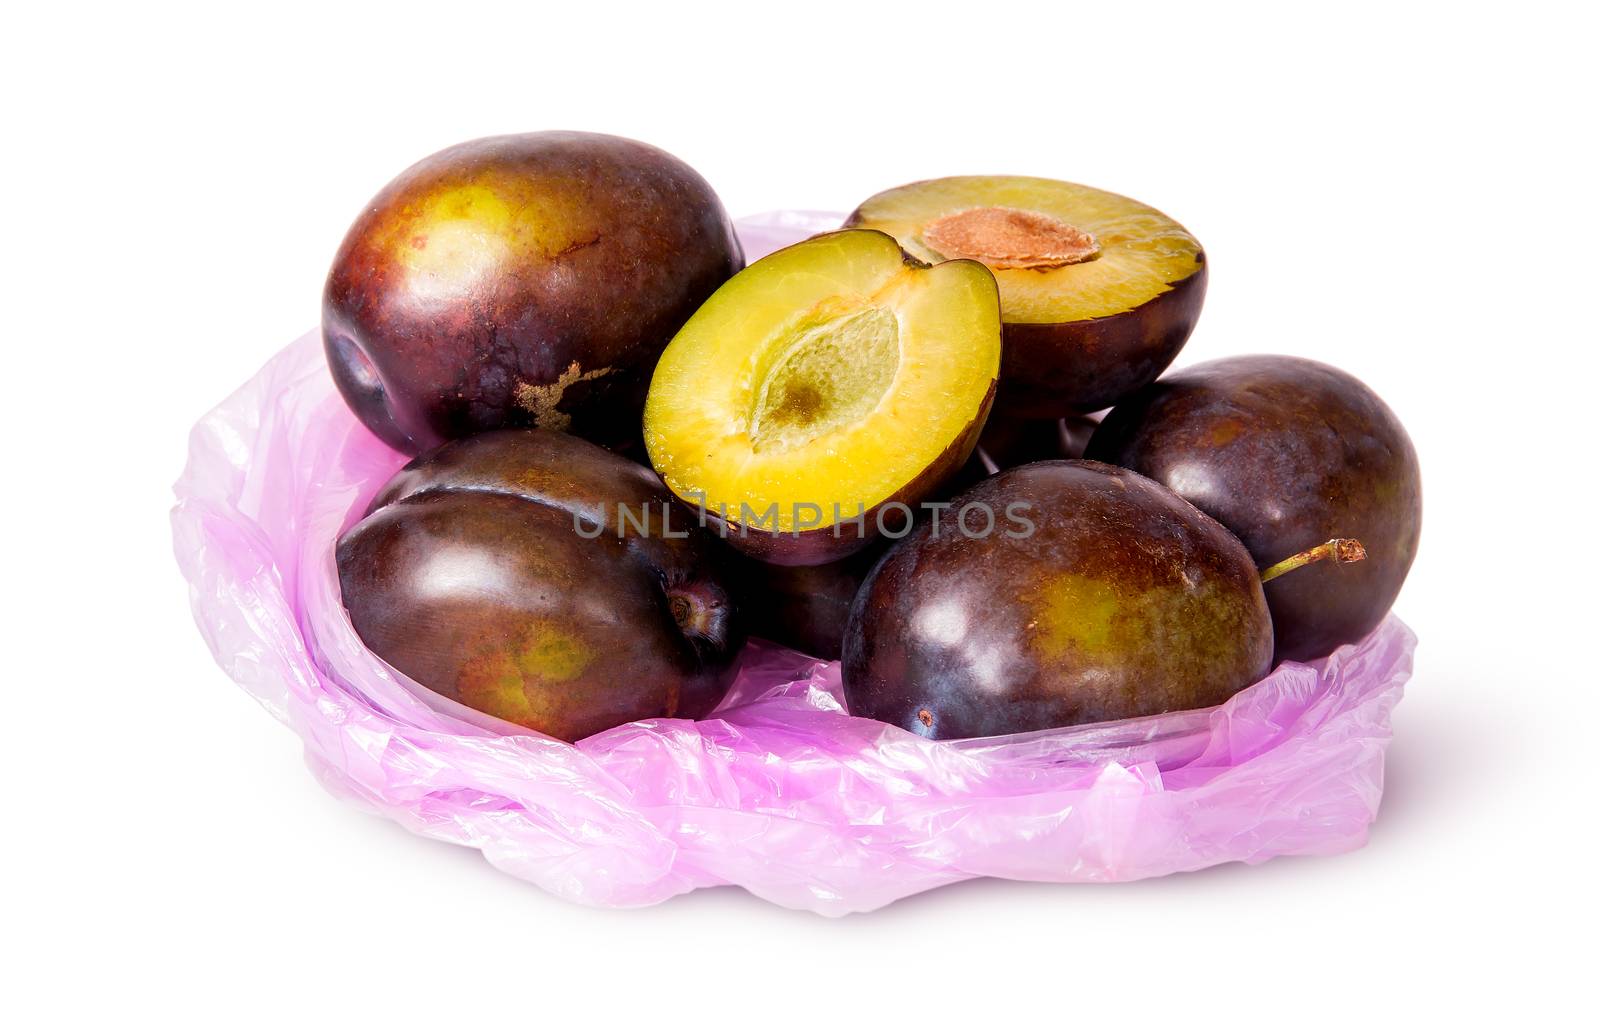 Whole and half violet plums in plastic bag by Cipariss